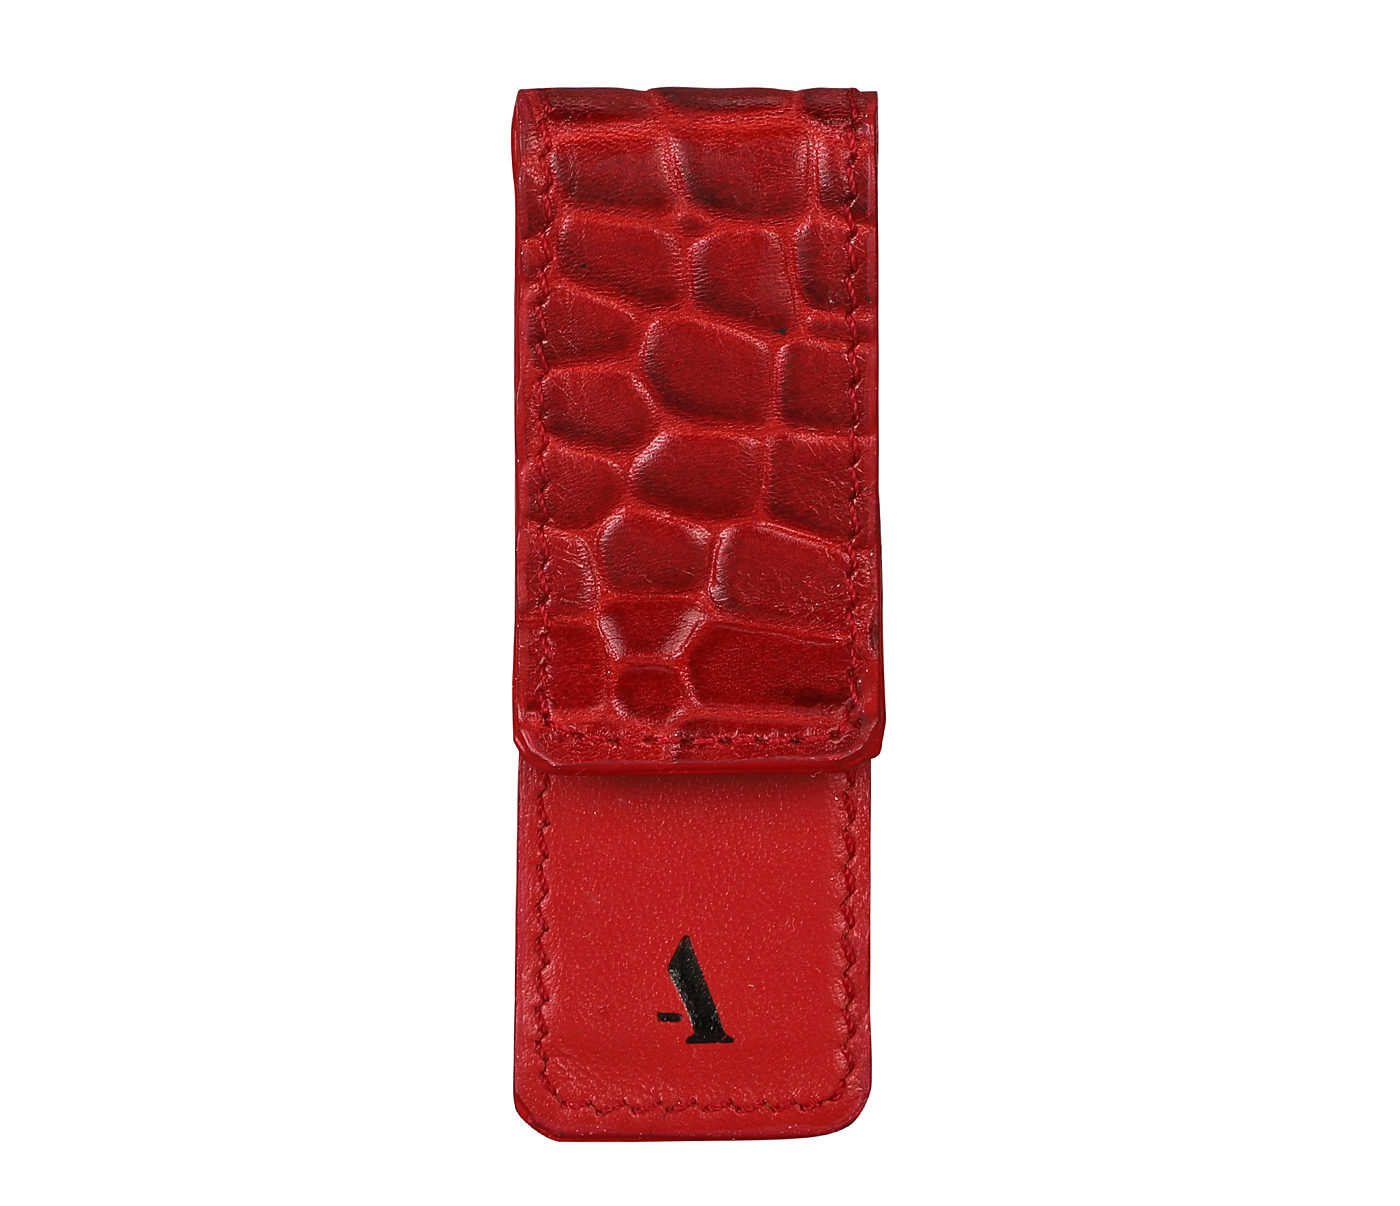 W336--Multipurpose card and money clip - Red